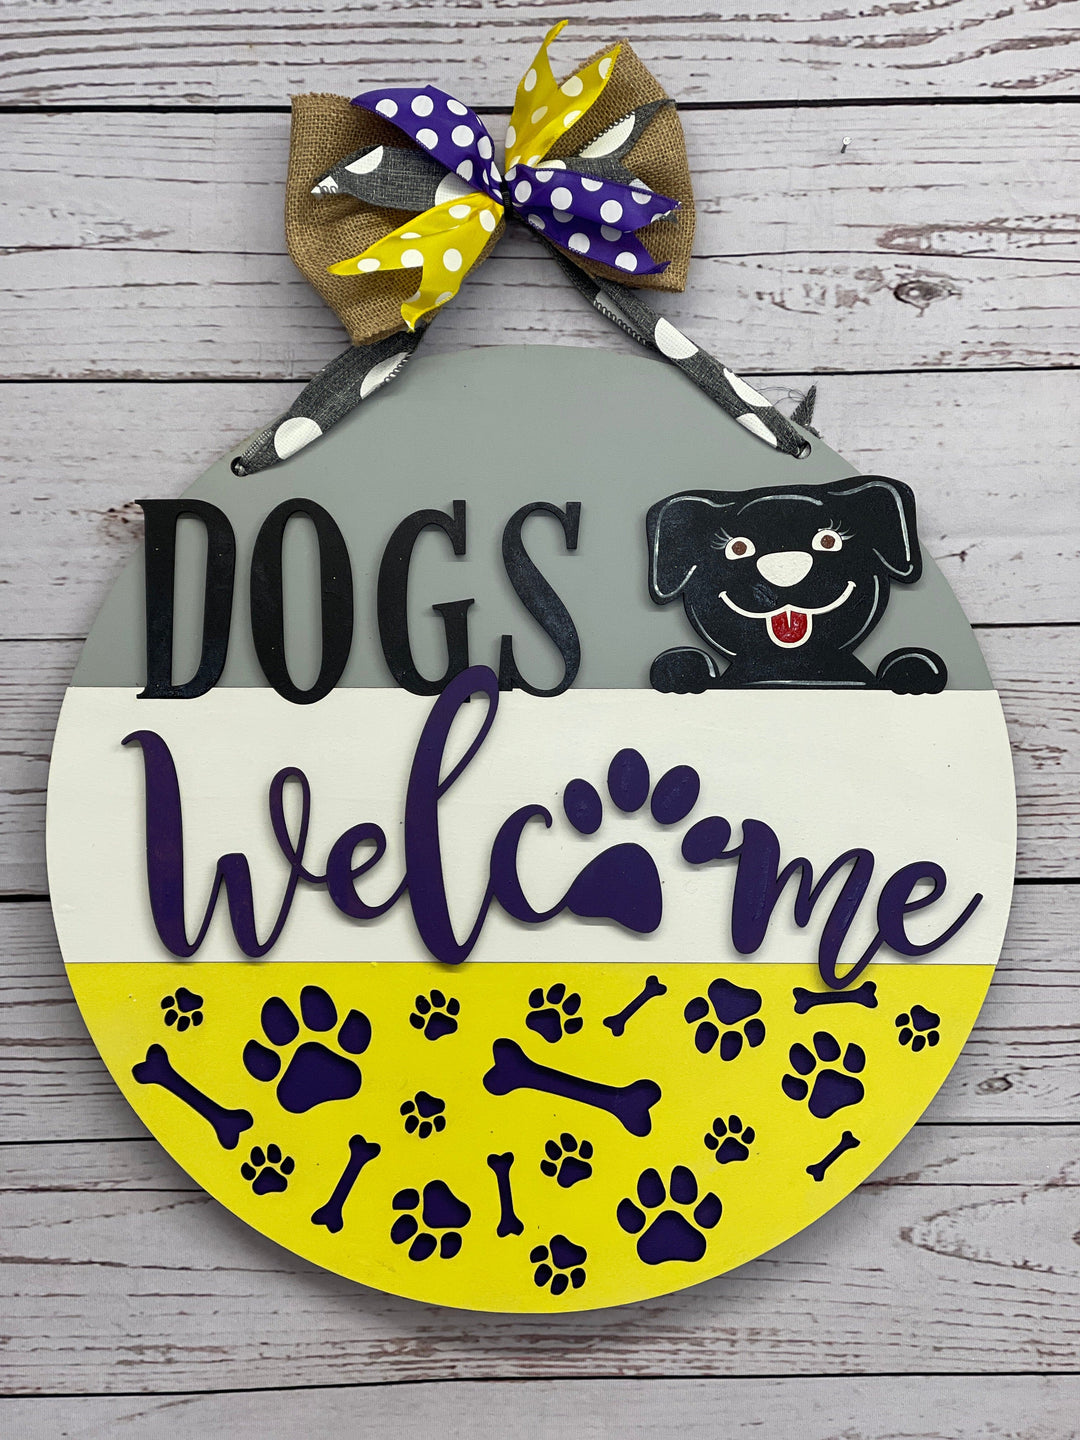 Finished Dogs Welcome Door Hanger with Ribbon and Bow